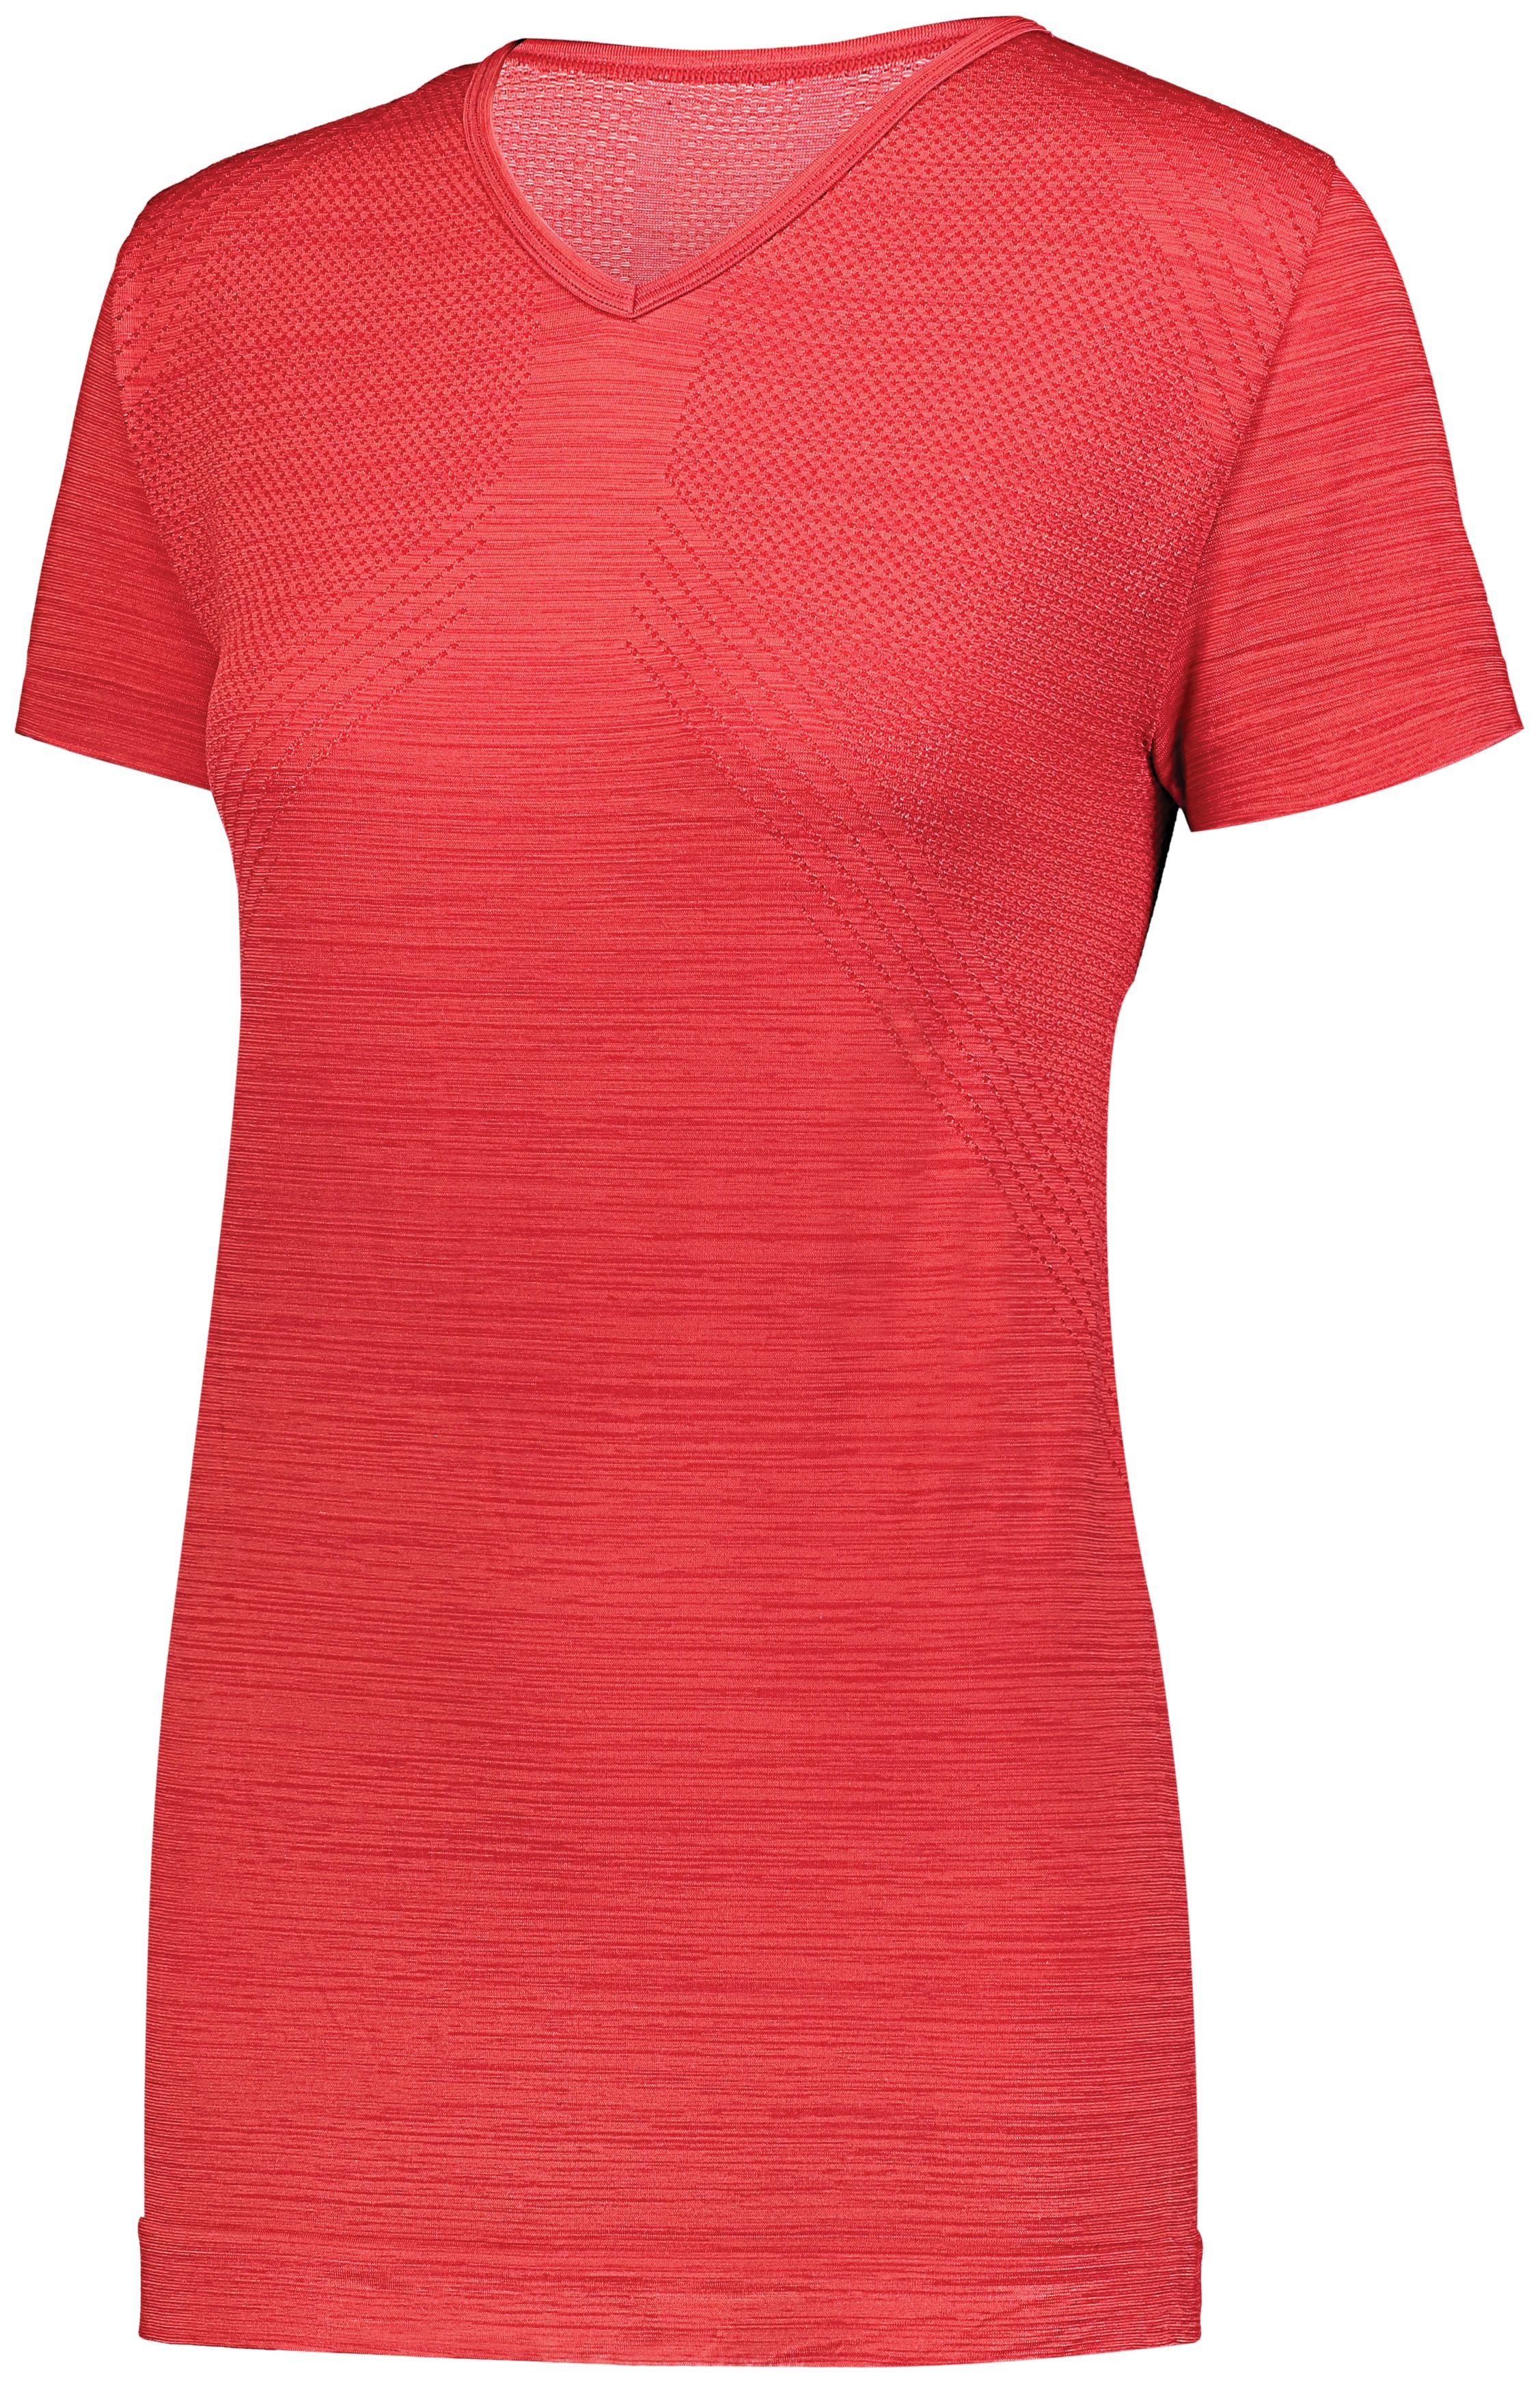 Holloway Ladies Striated Shirt Short Sleeve in Scarlet  -Part of the Ladies, Holloway, Shirts, Striated-Collection product lines at KanaleyCreations.com